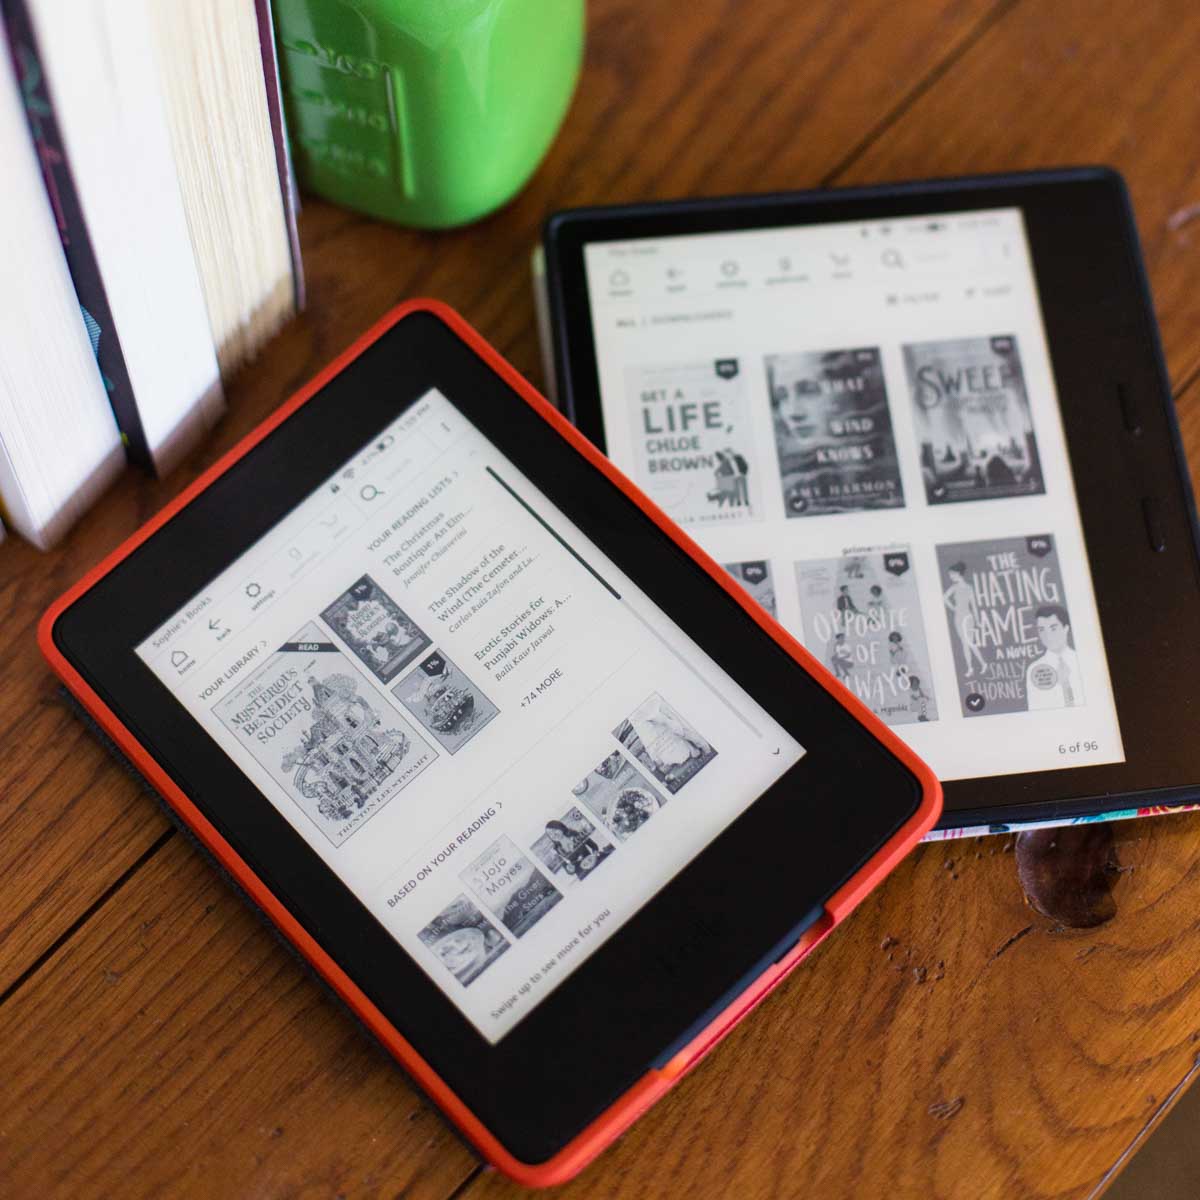 Kindle Paperwhite Black Friday deal: $20 off Kindle Paperwhite